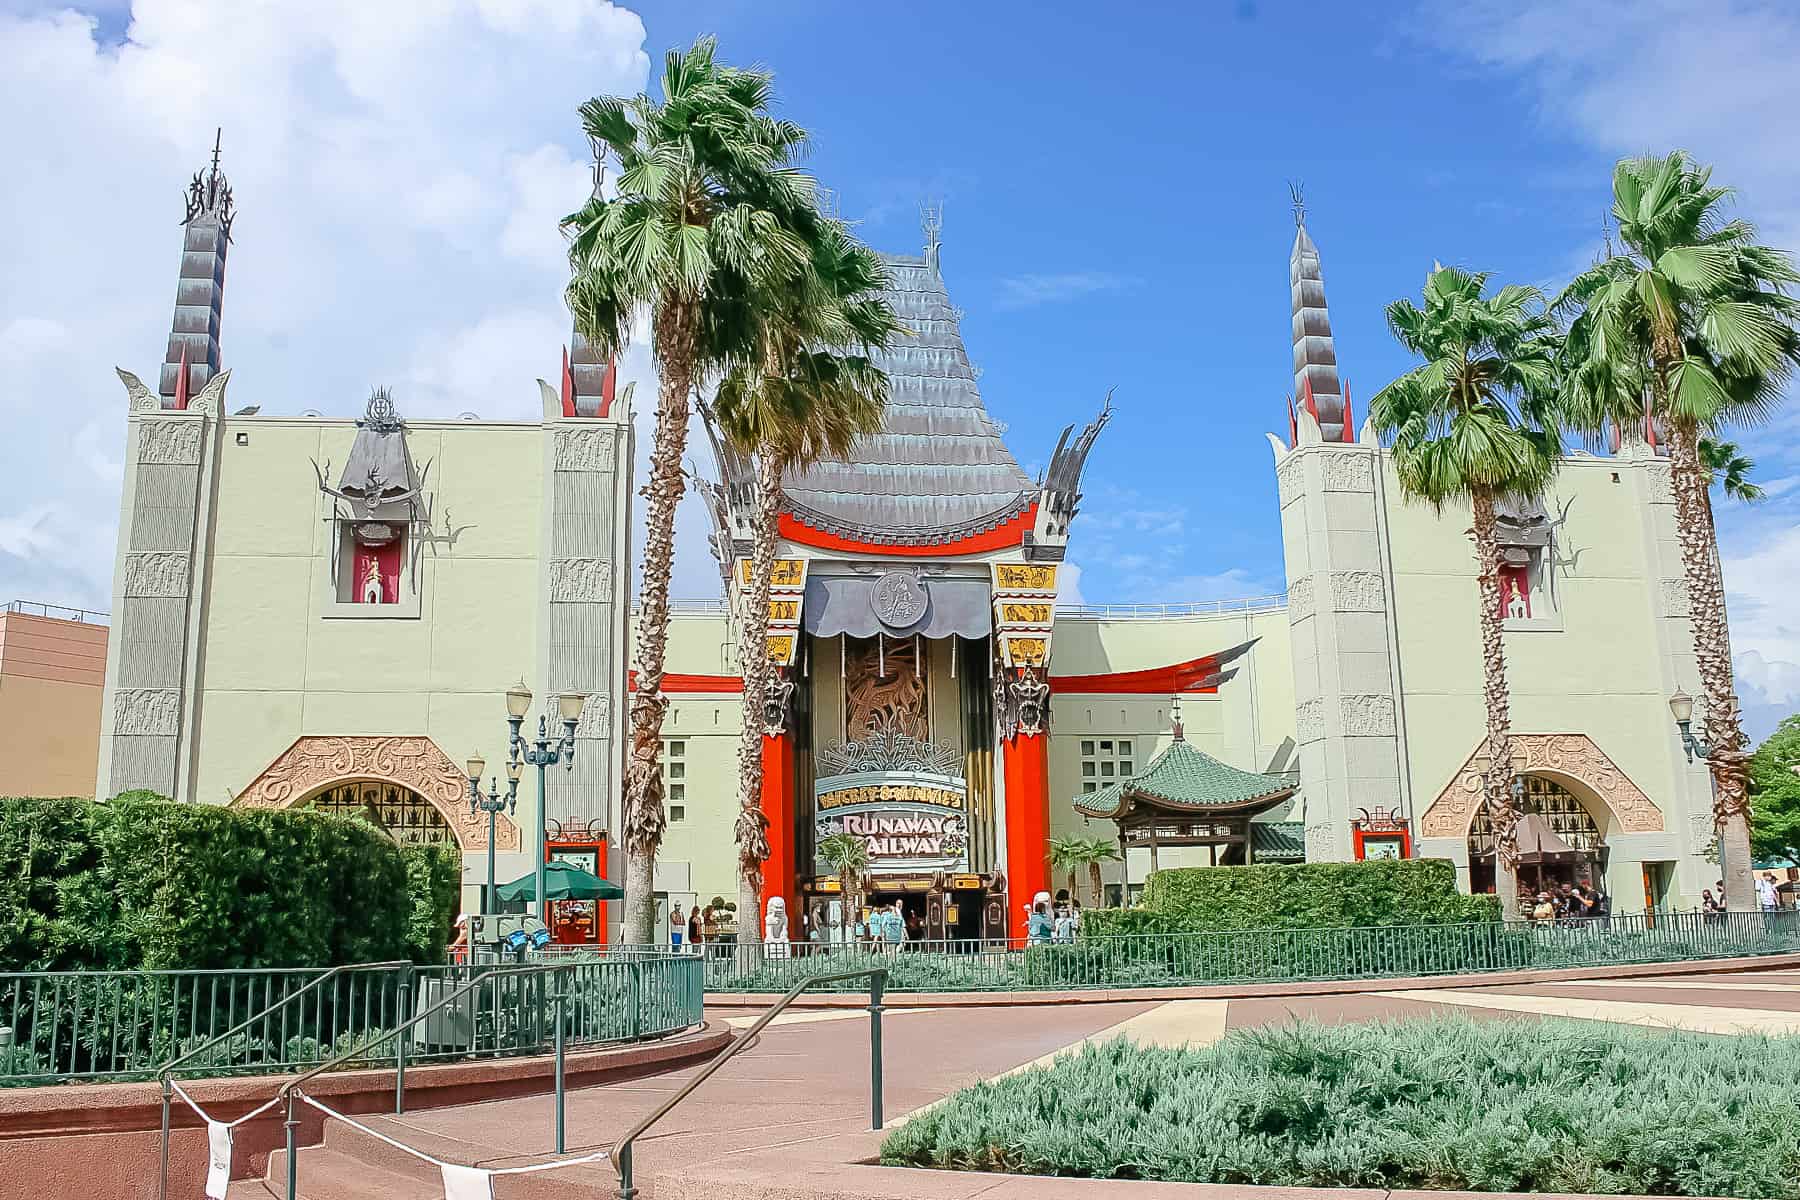 The Chinese Theater replica is home to Mickey and Minnie's Runaway Railway. 